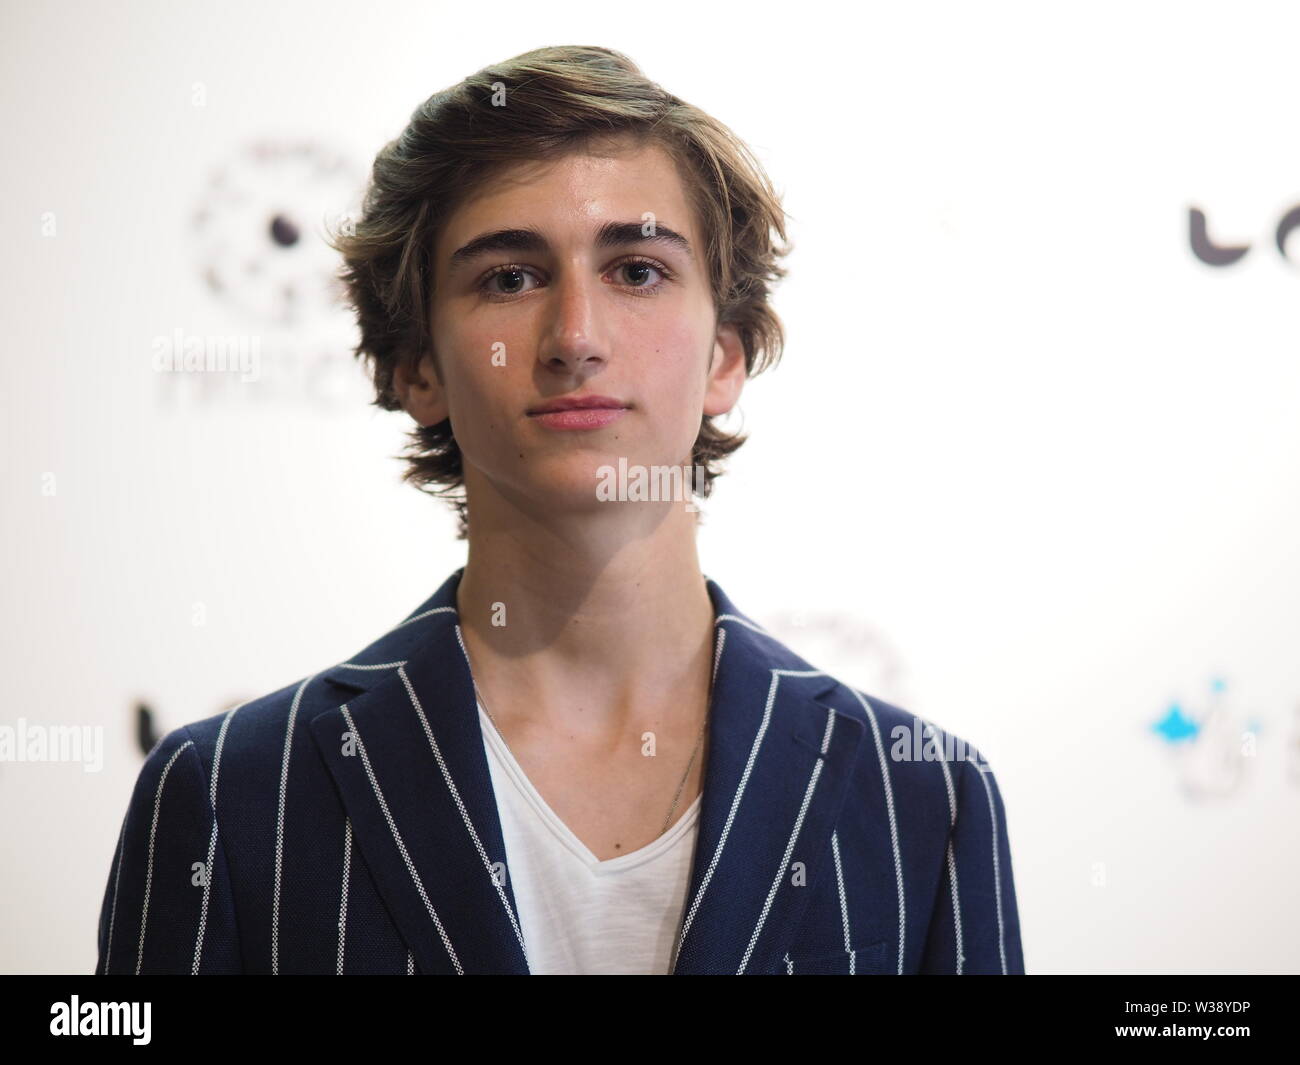 BFI SouthBank, London – 11th July 2019 – Superstar Actor Sebastian Croft At The Premier of Horrible Histories The Movie: - Rotten Romans Stock Photo